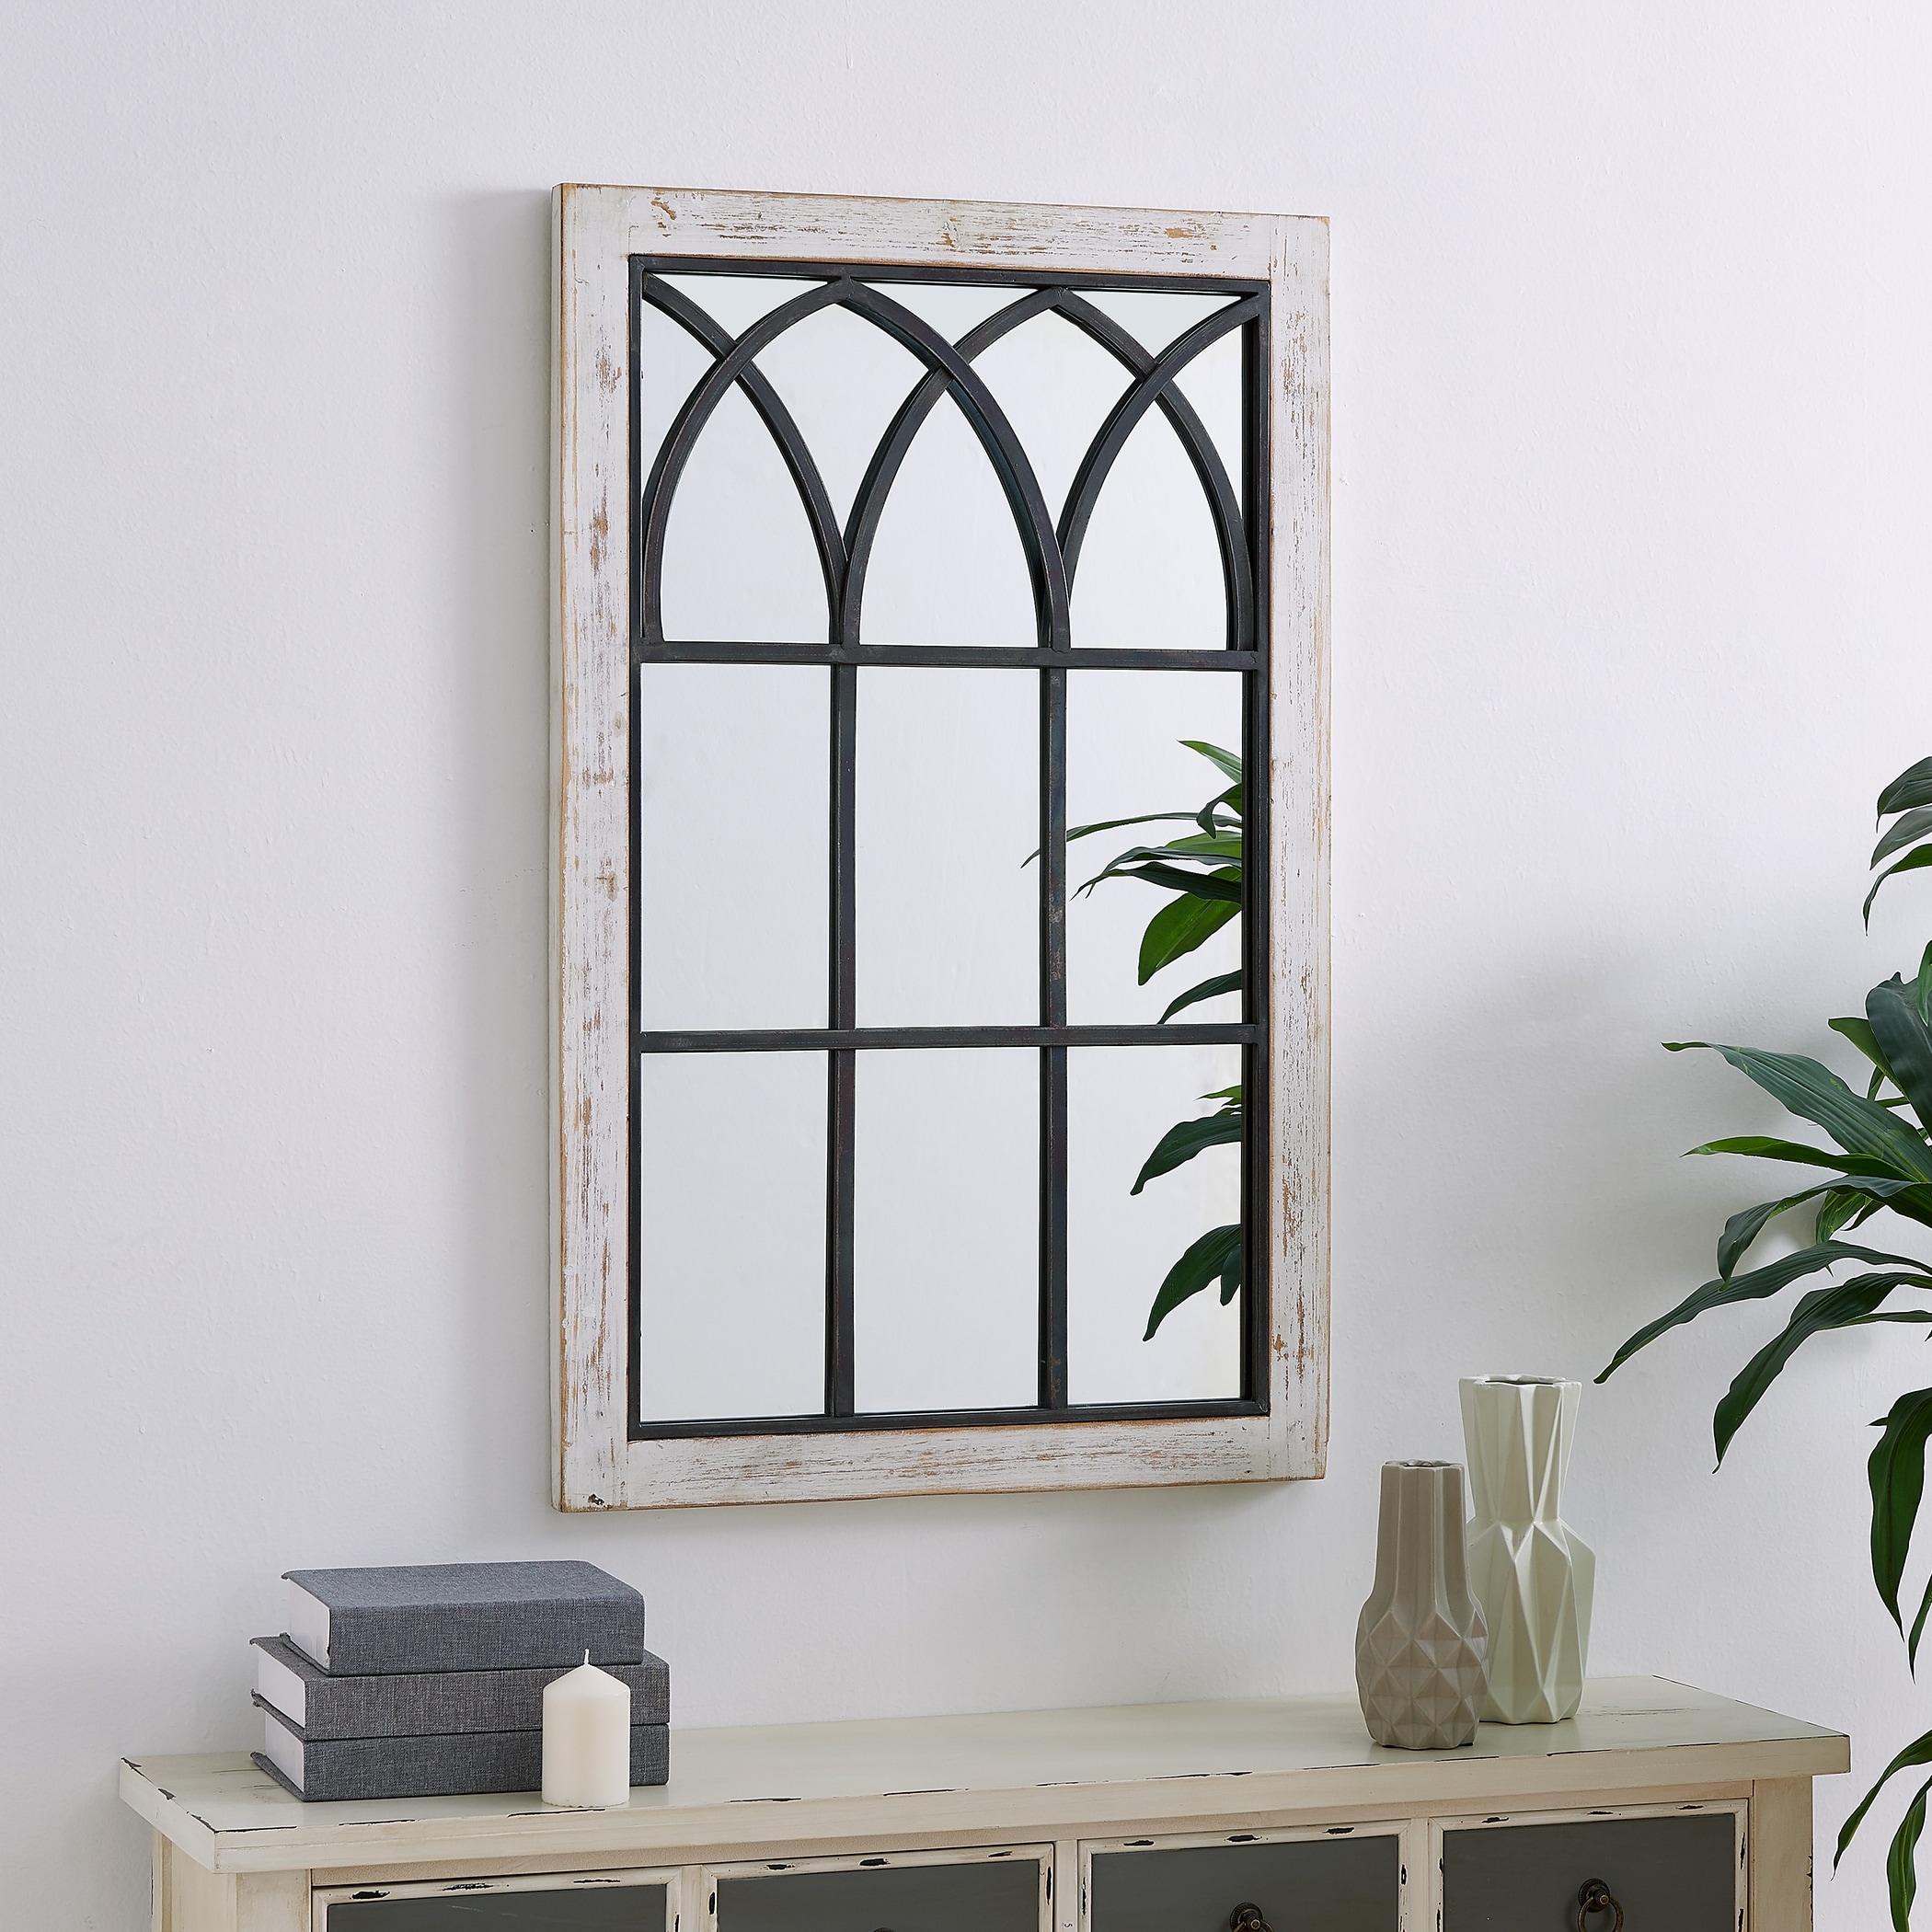 FirsTime  Co. Vista Arched Farmhouse Window Mirror, American Crafted,  Distressed White, Metal, 24 x x 37.5 in On Sale Bed Bath  Beyond  25621307